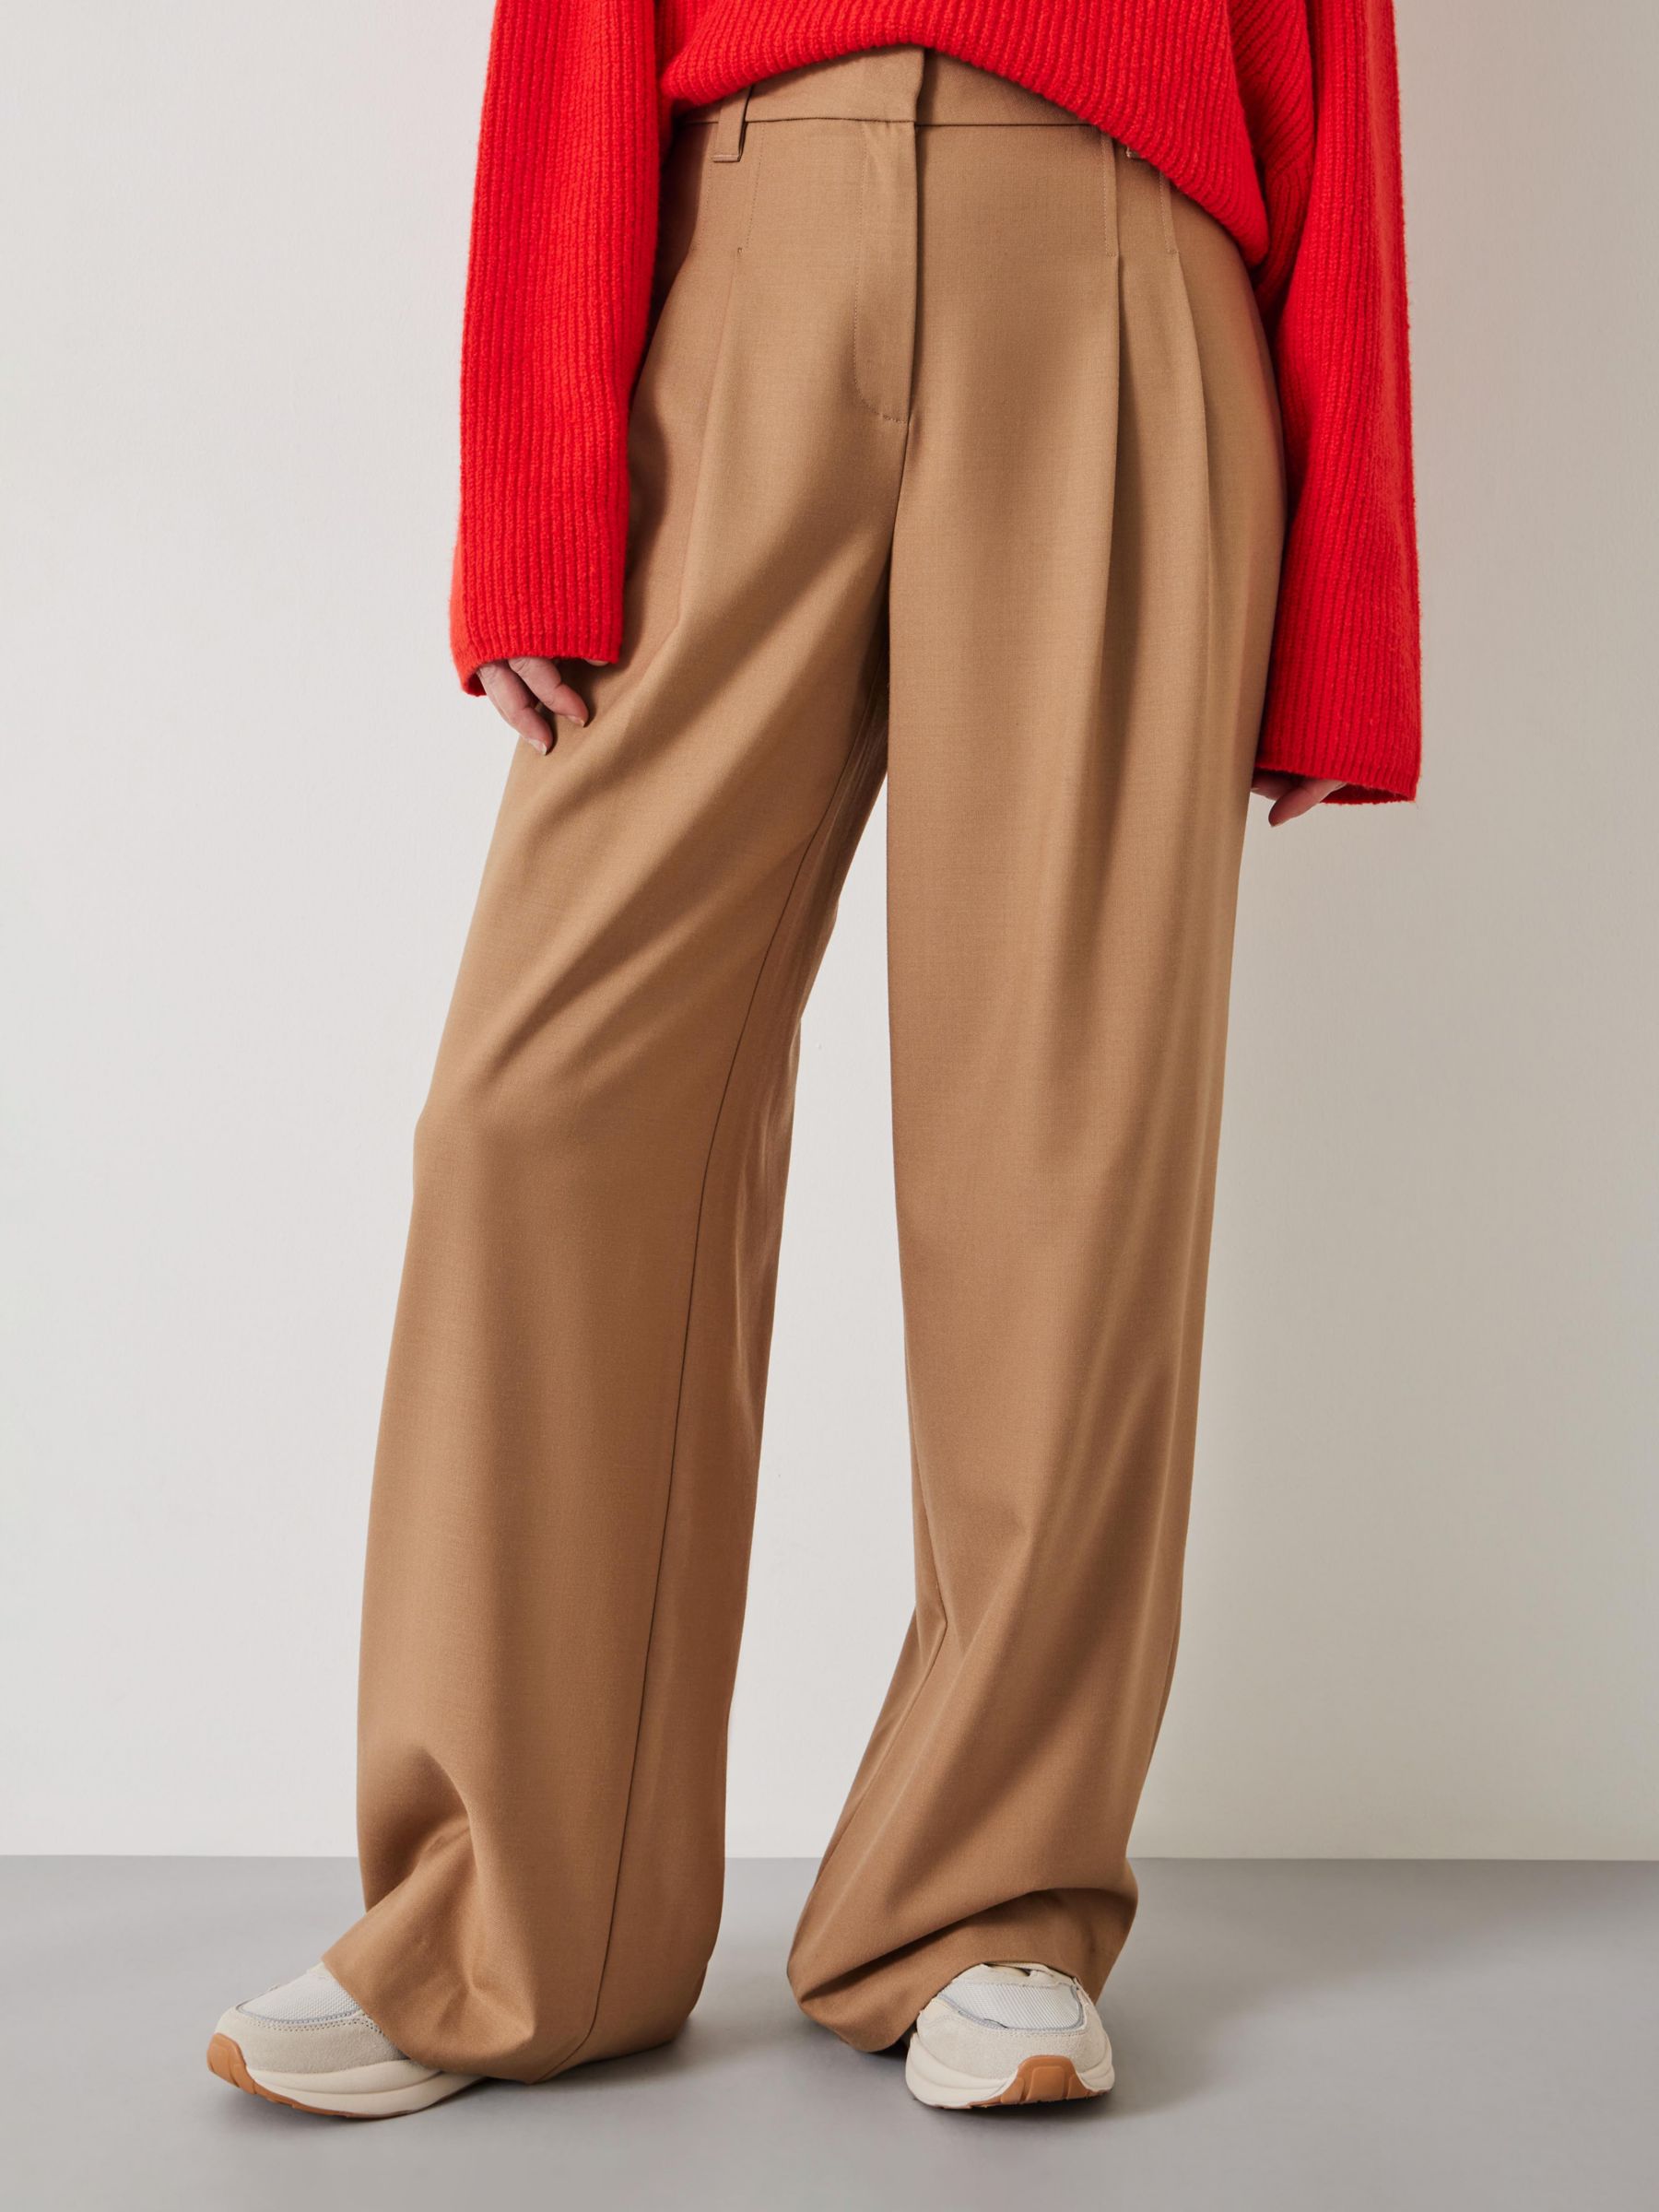 Cotton Blend Winter Red Pants Wide Leg Tweed Pants for Women in Red Light  Camel Black One Size 